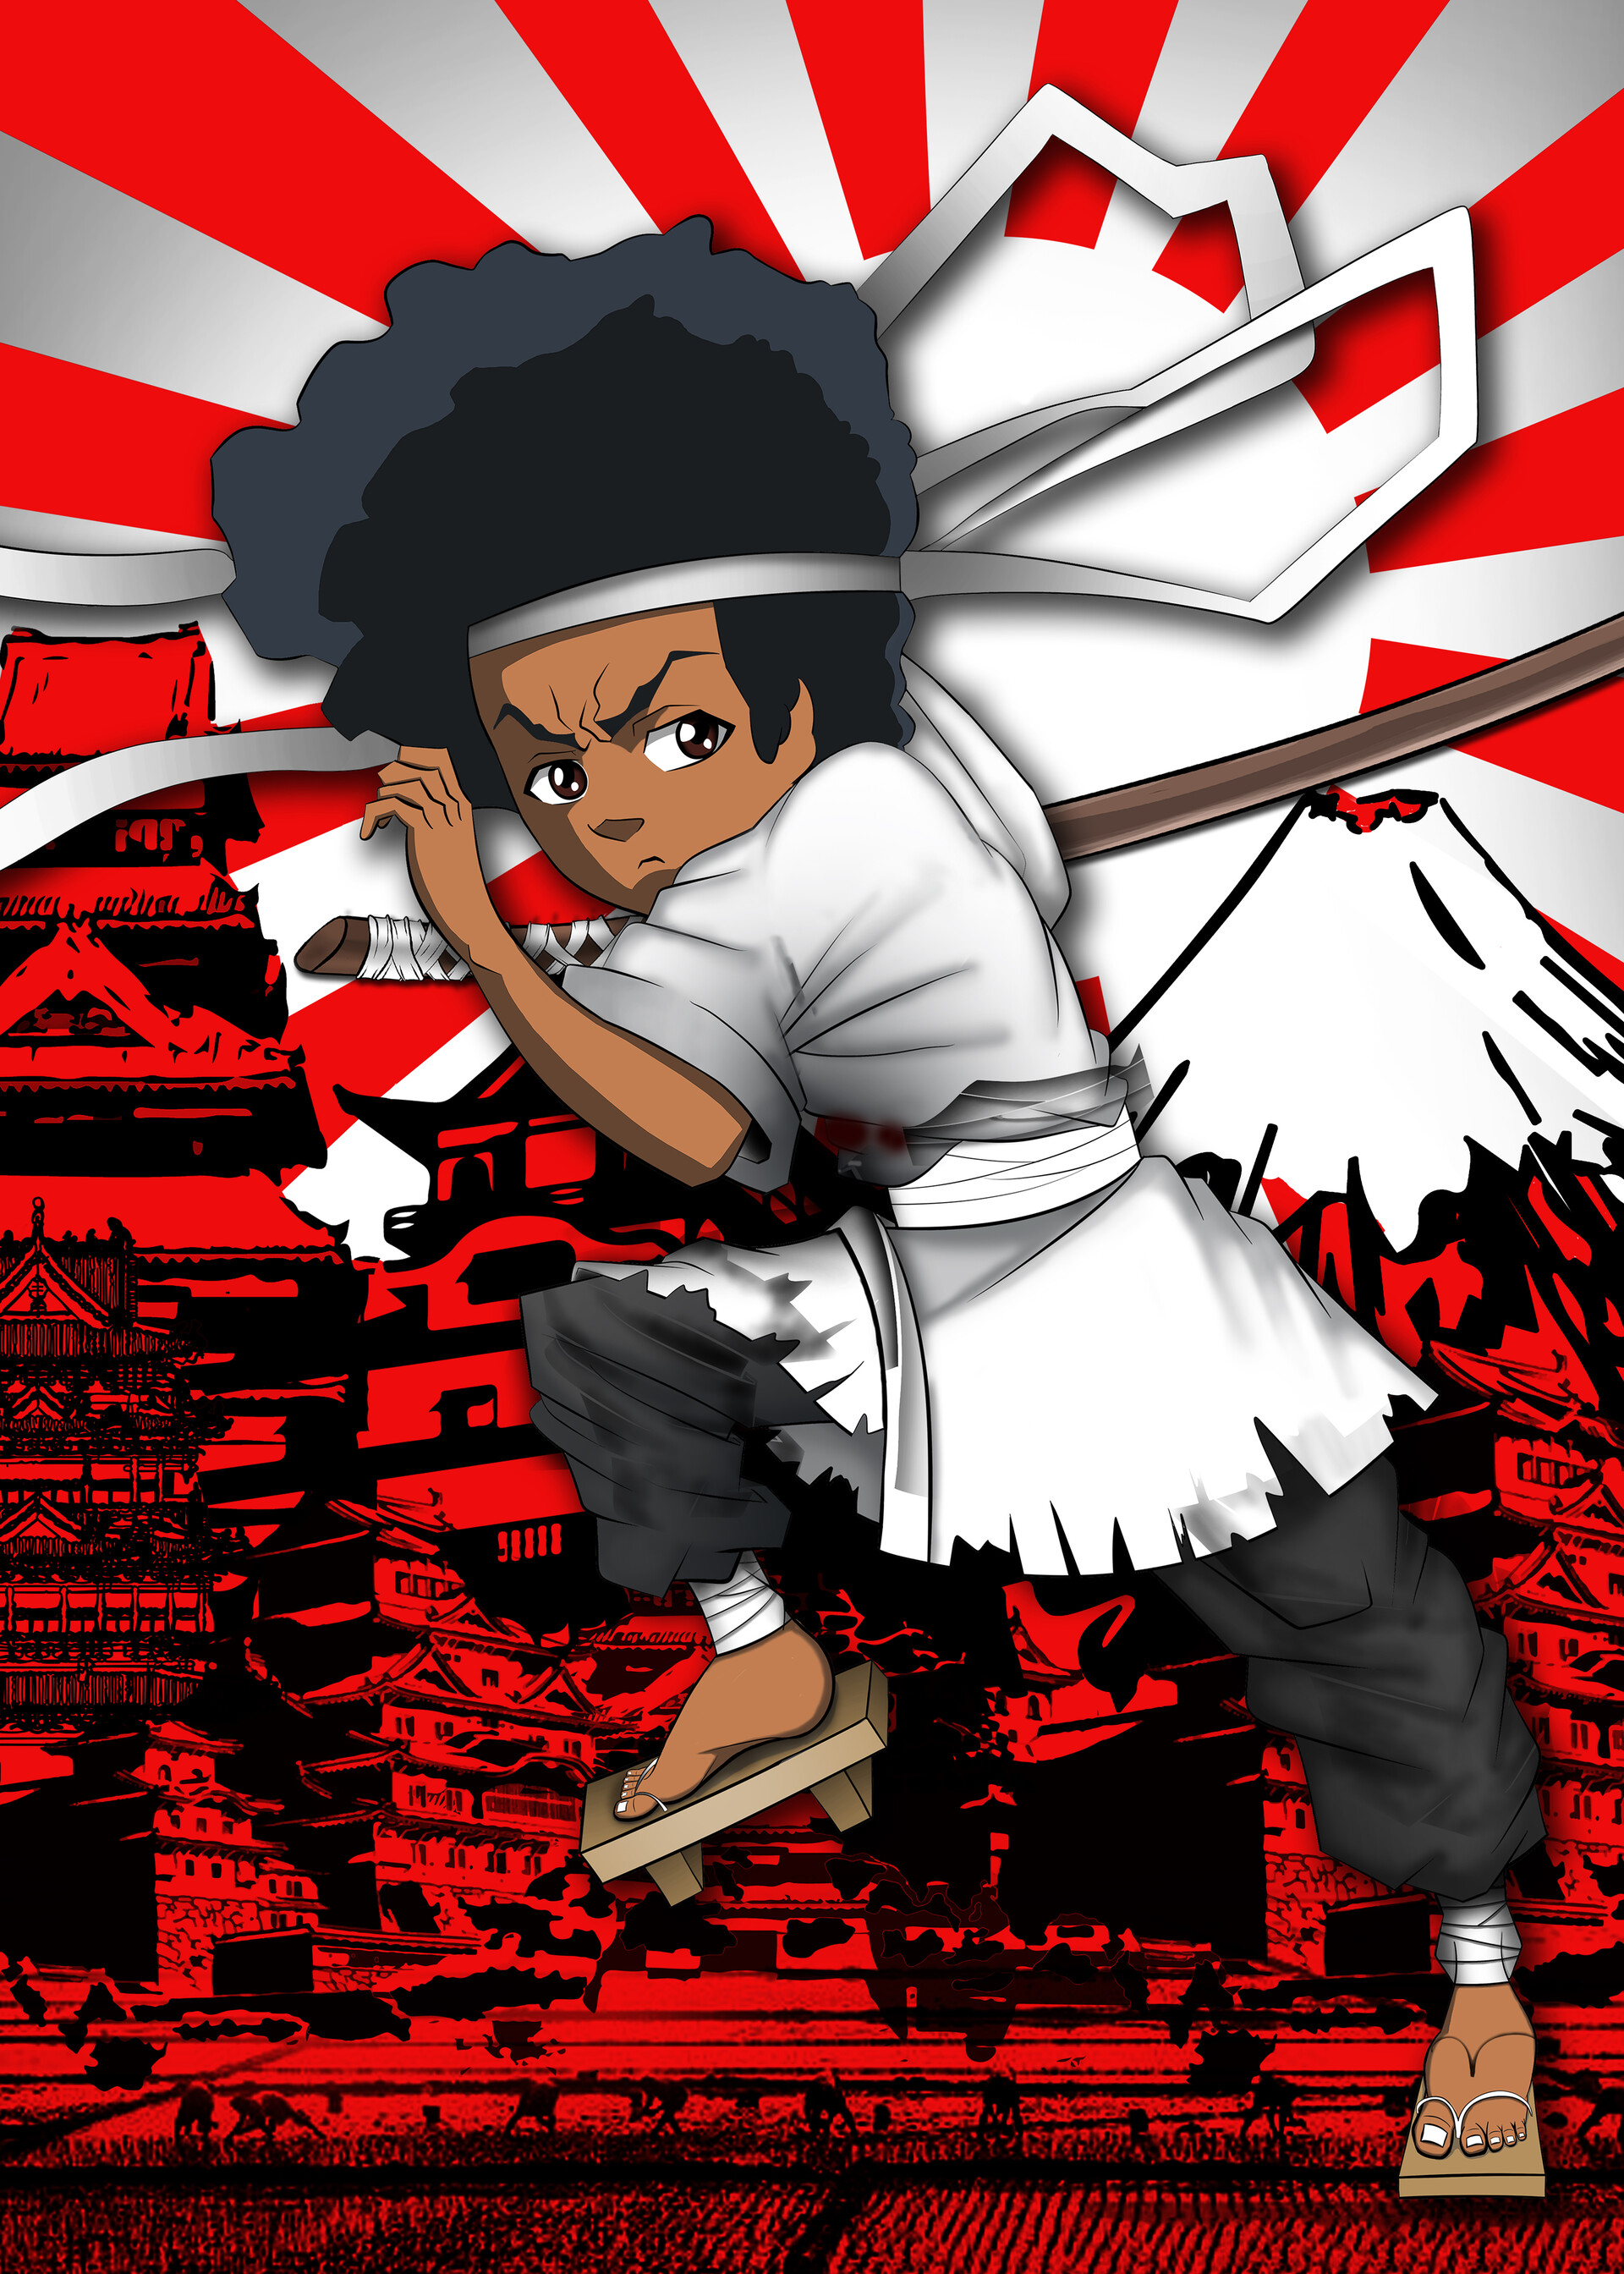 ETOMEY Anime Poster The Boondock Riley And Huey Simple Cool Painting Art  Poster (2) Canvas Poster Bedroom Decor Office Room Decor Gift Unframe-style  36x24inch(90x60cm) : Amazon.ca: Home